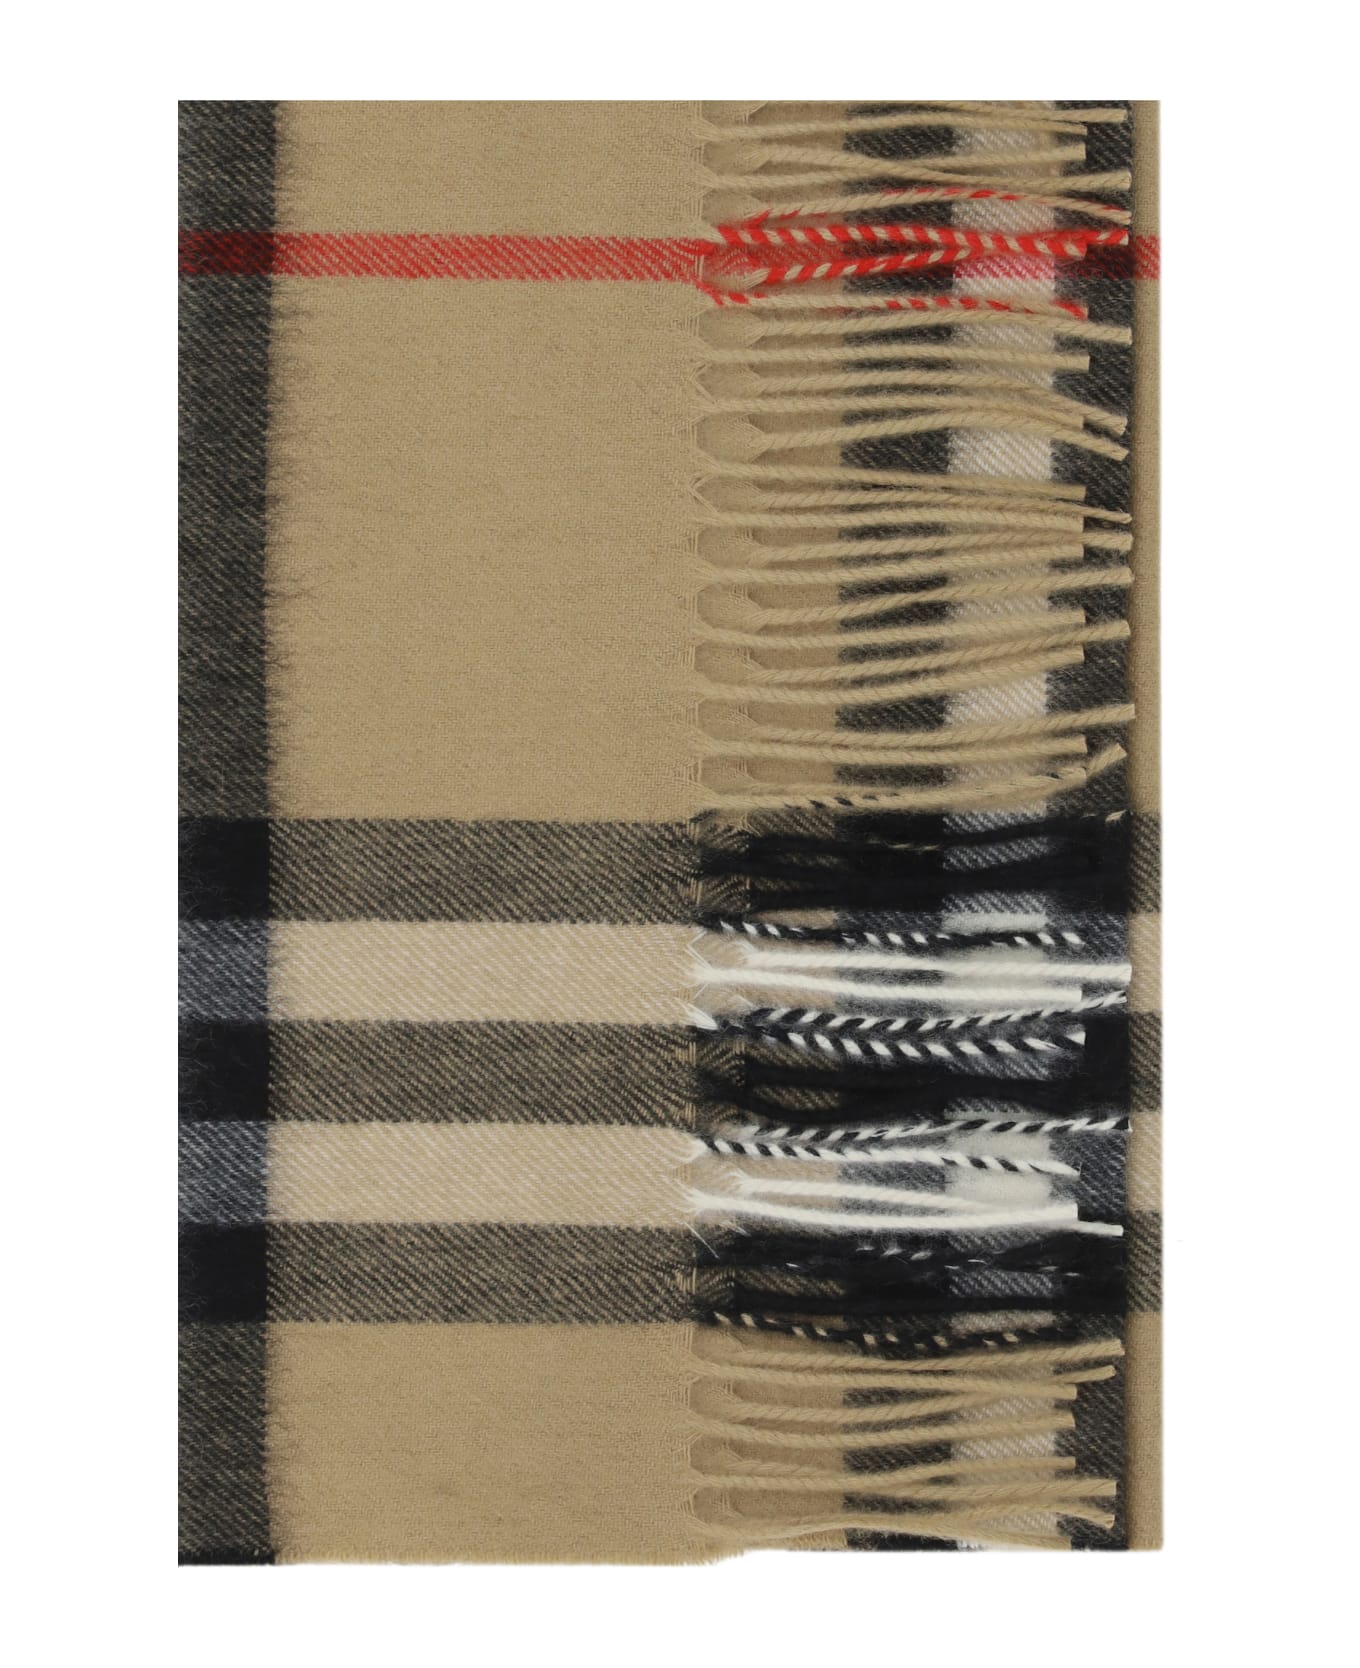 Burberry Scarf - Archive Beige スカーフ